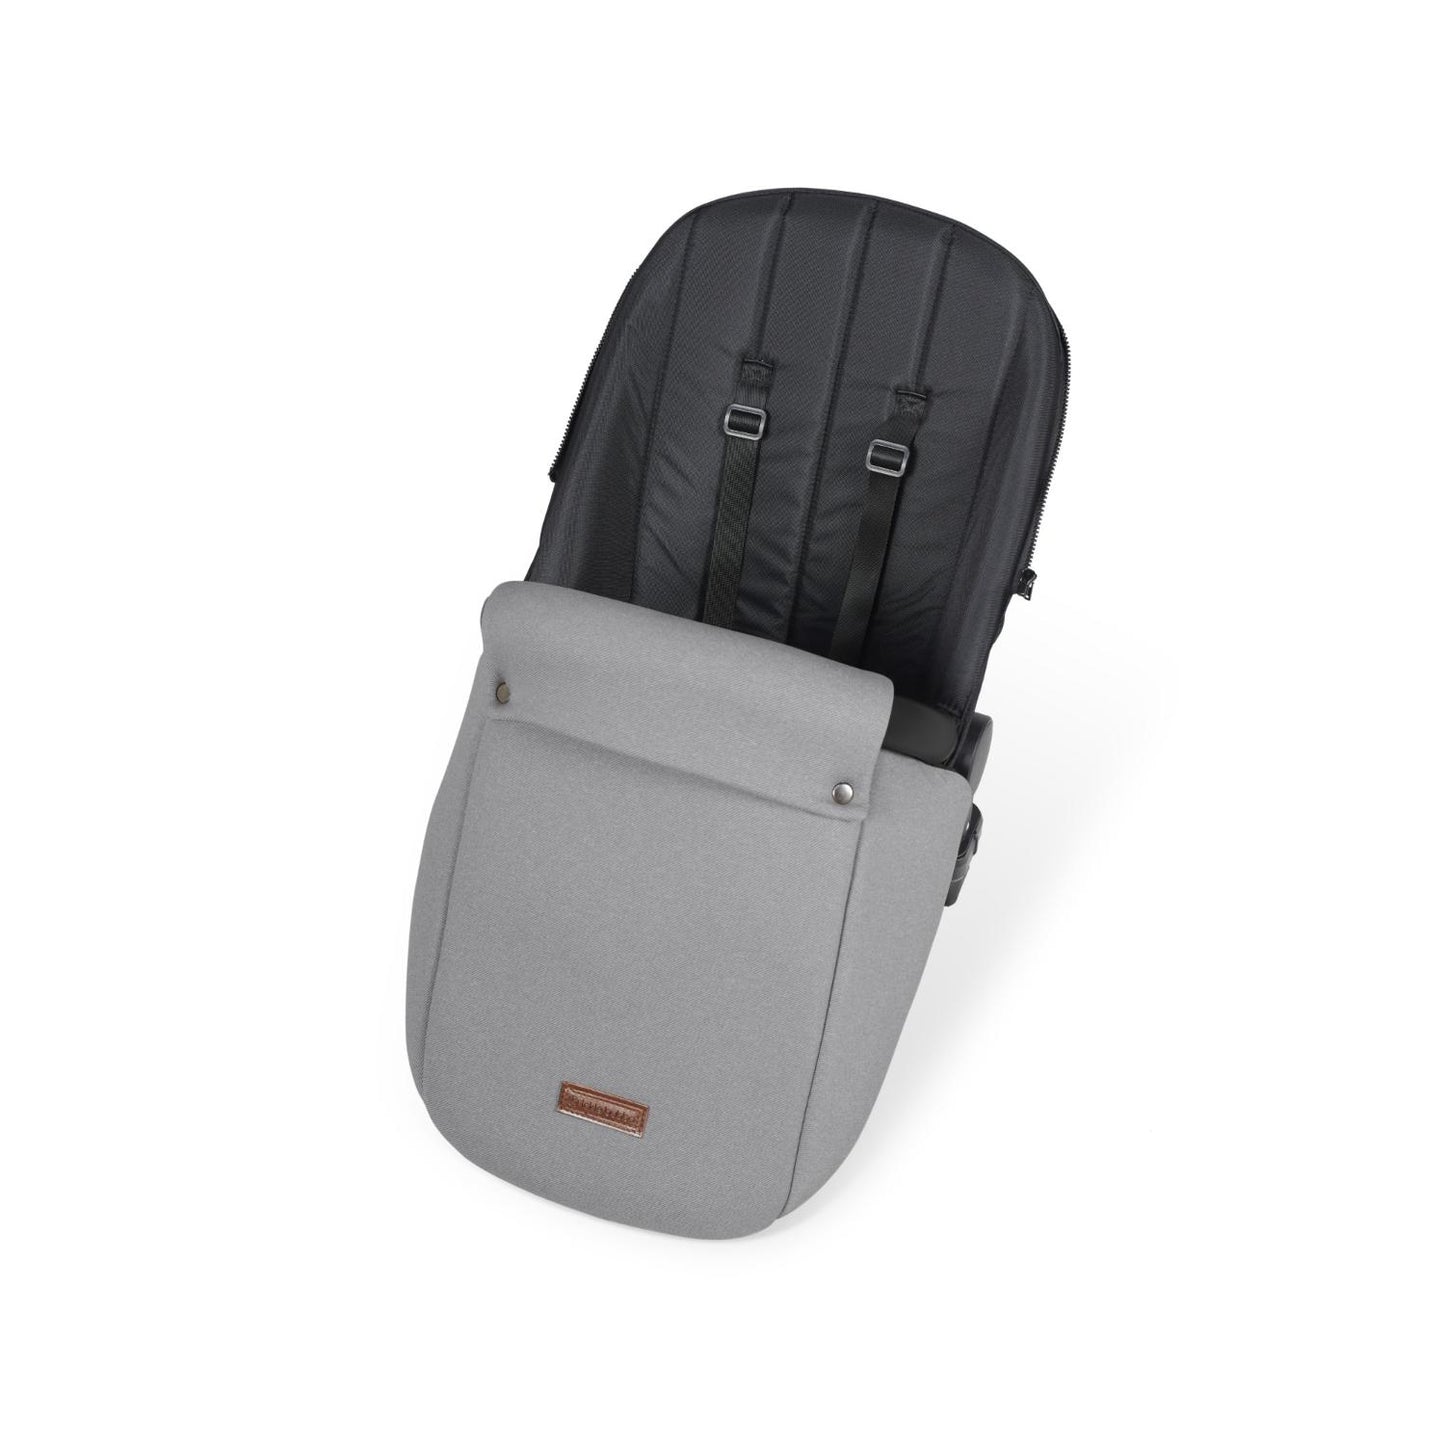 Seat unit with foot warmer included in Ickle Bubba Stomp Luxe All-in-One Travel System in Pearl Grey colour